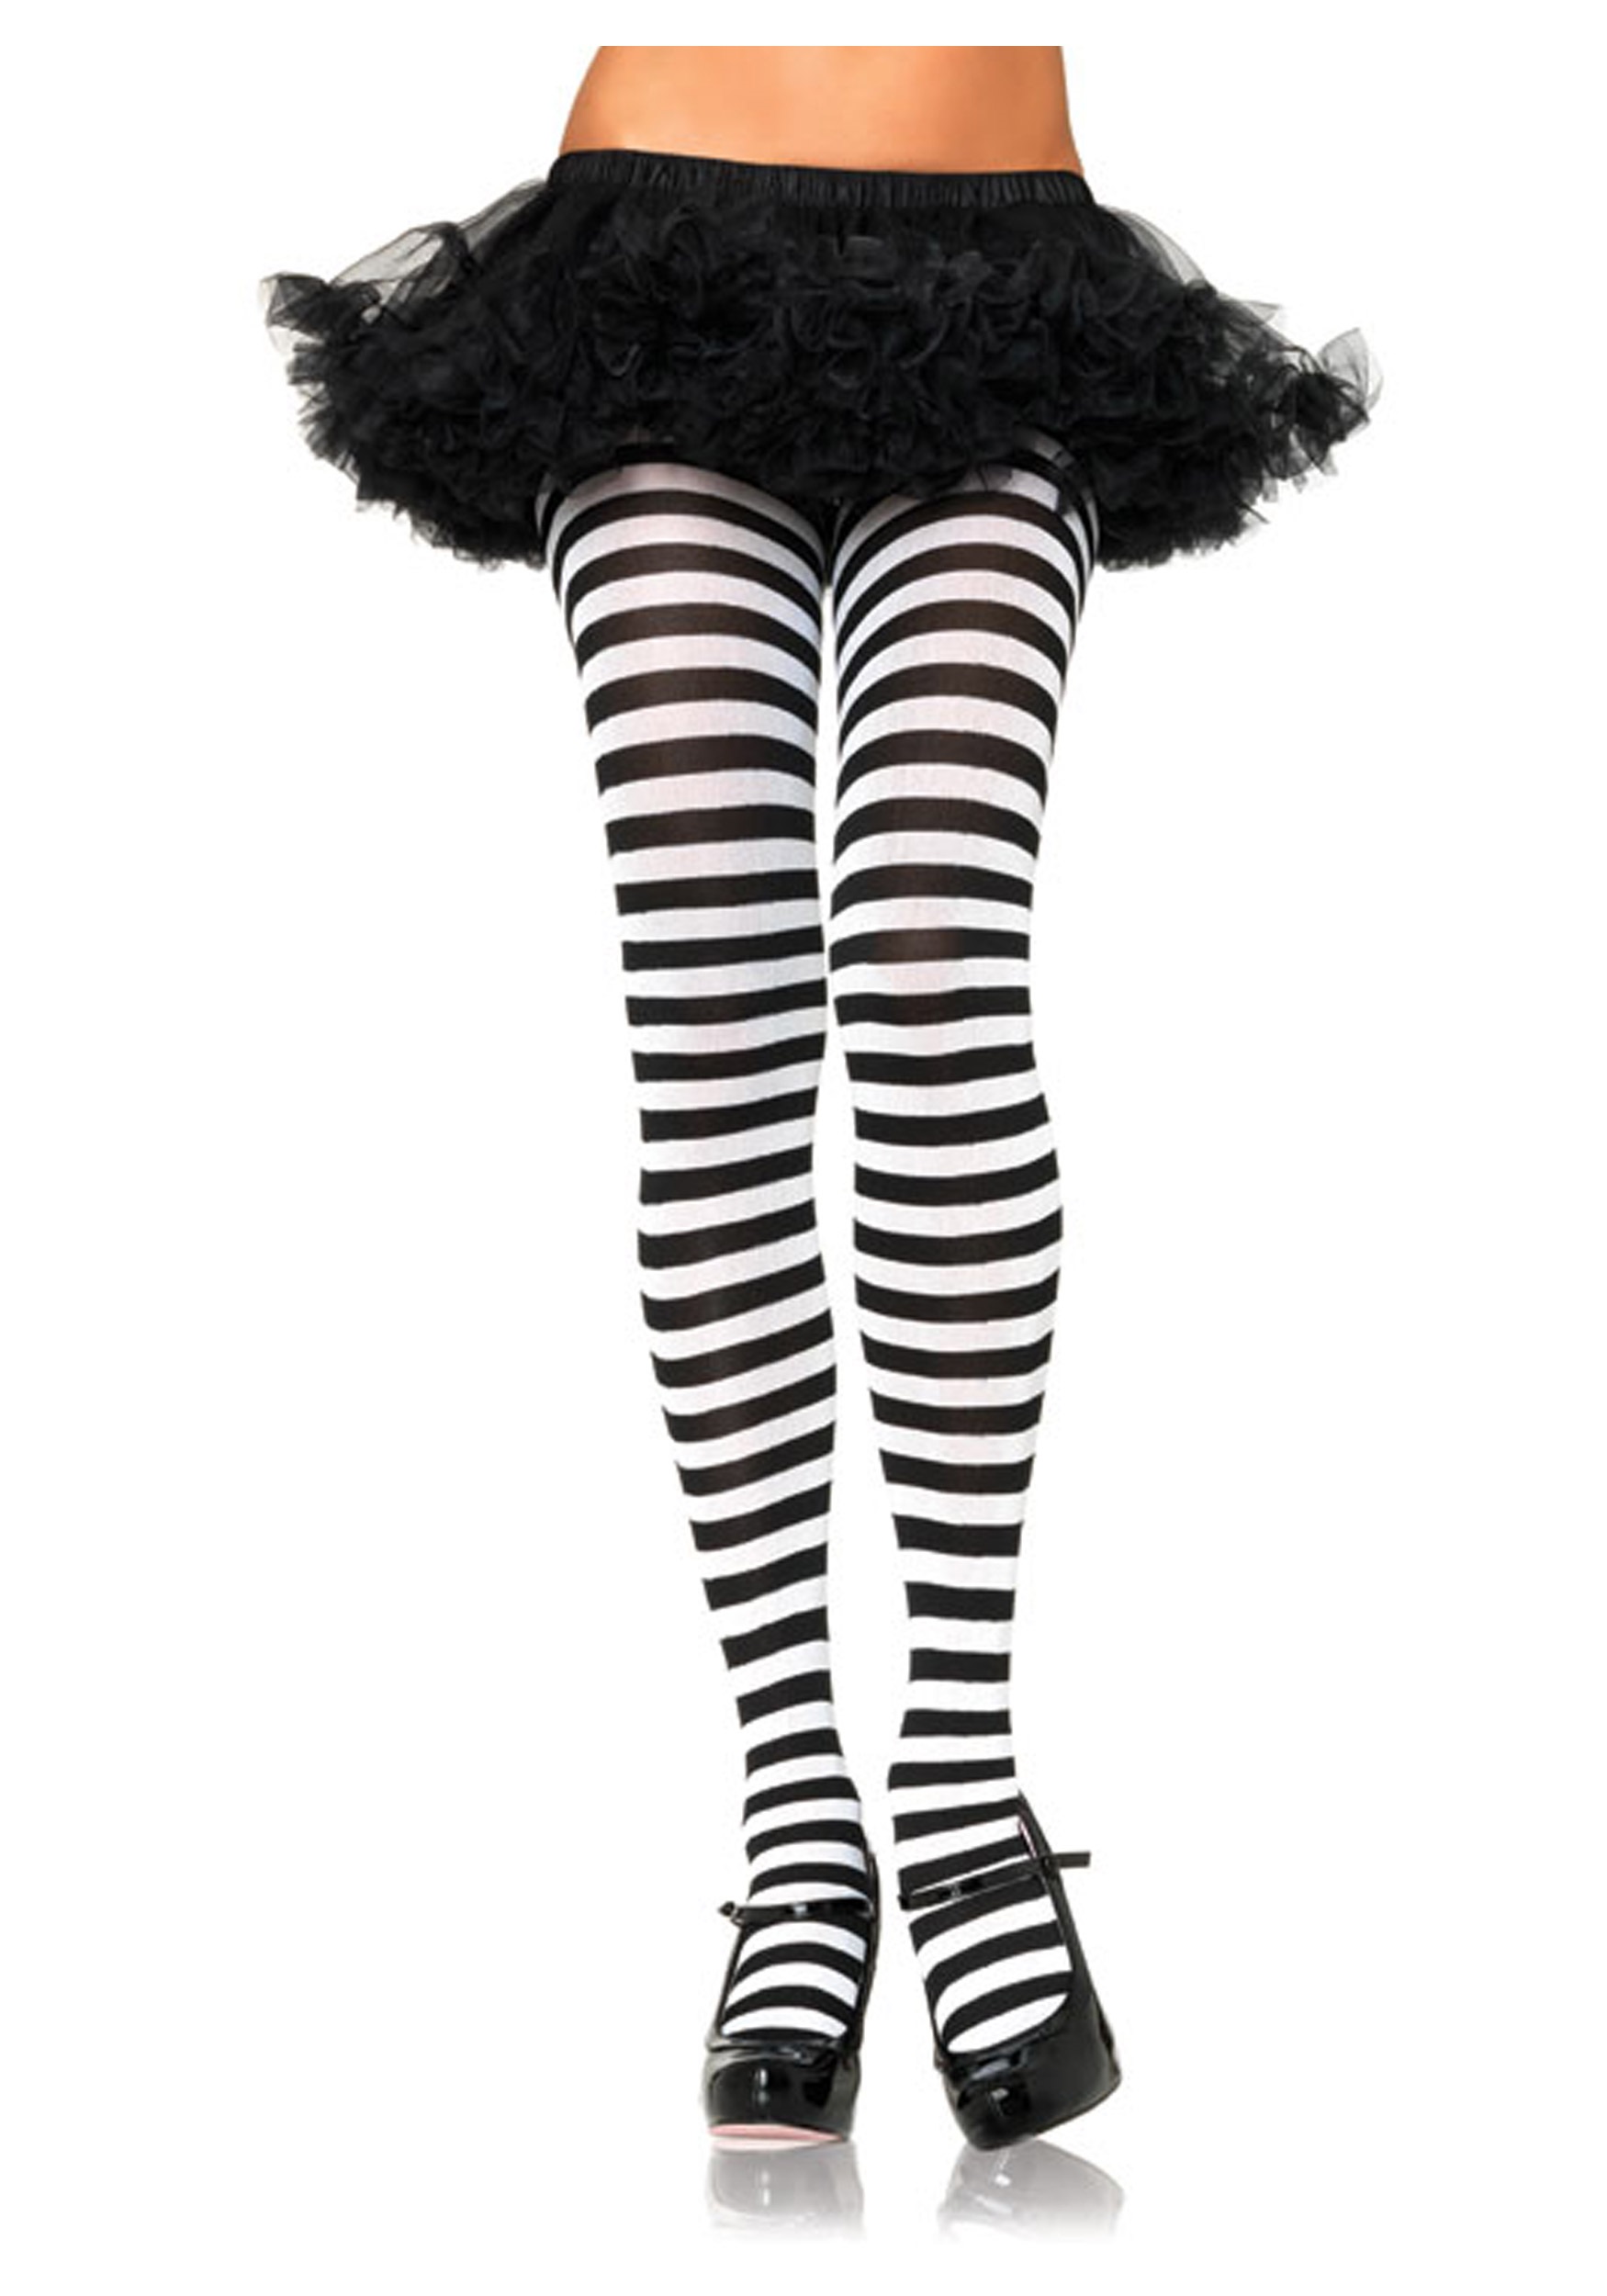 https://images.halloweencostumes.eu/products/13706/1-1/plus-size-black--white-striped-tights.jpg